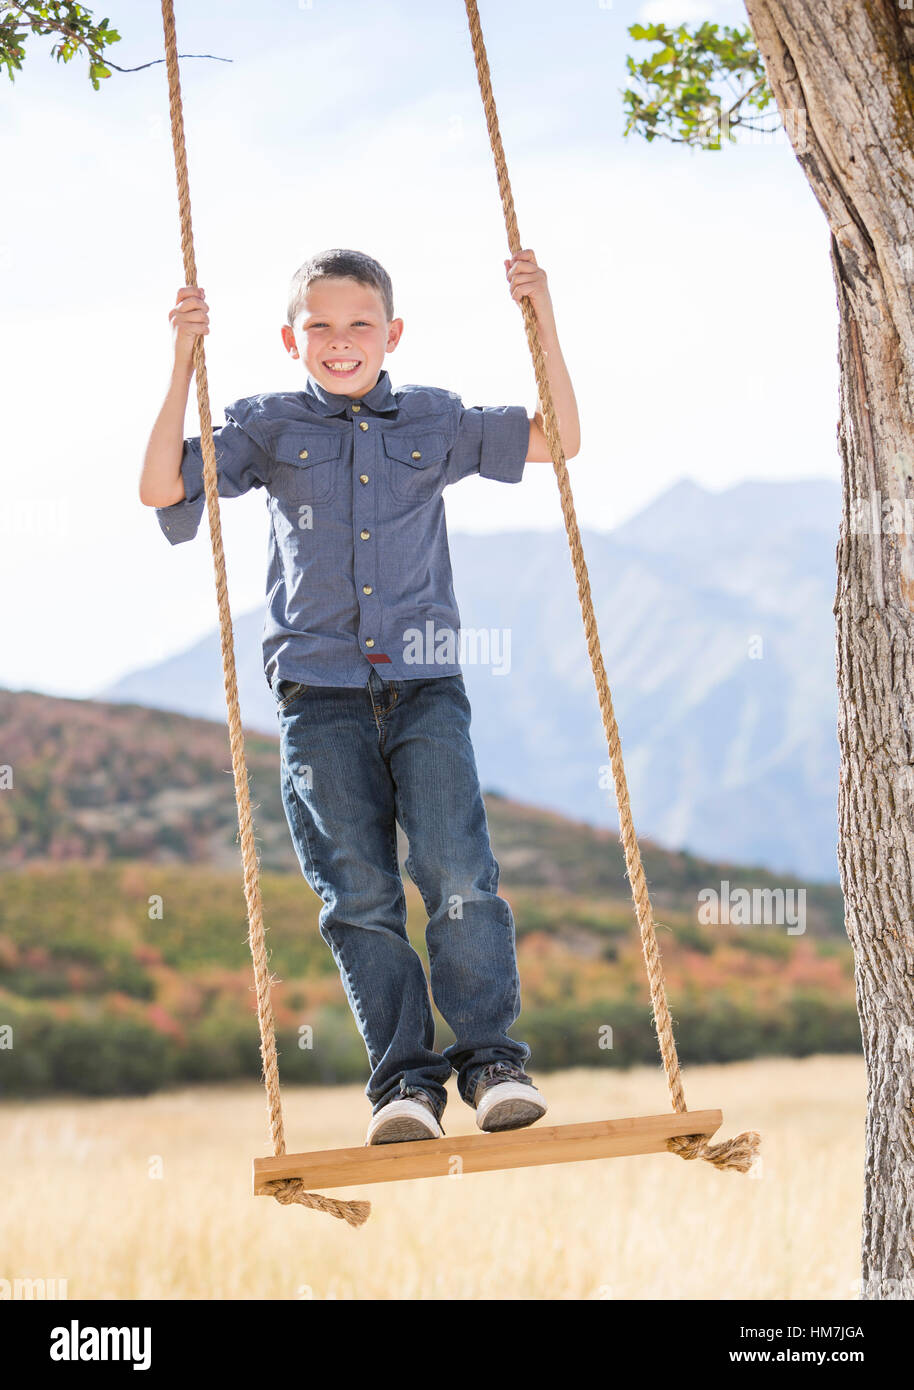 Boy (6-7) standing on swing Banque D'Images